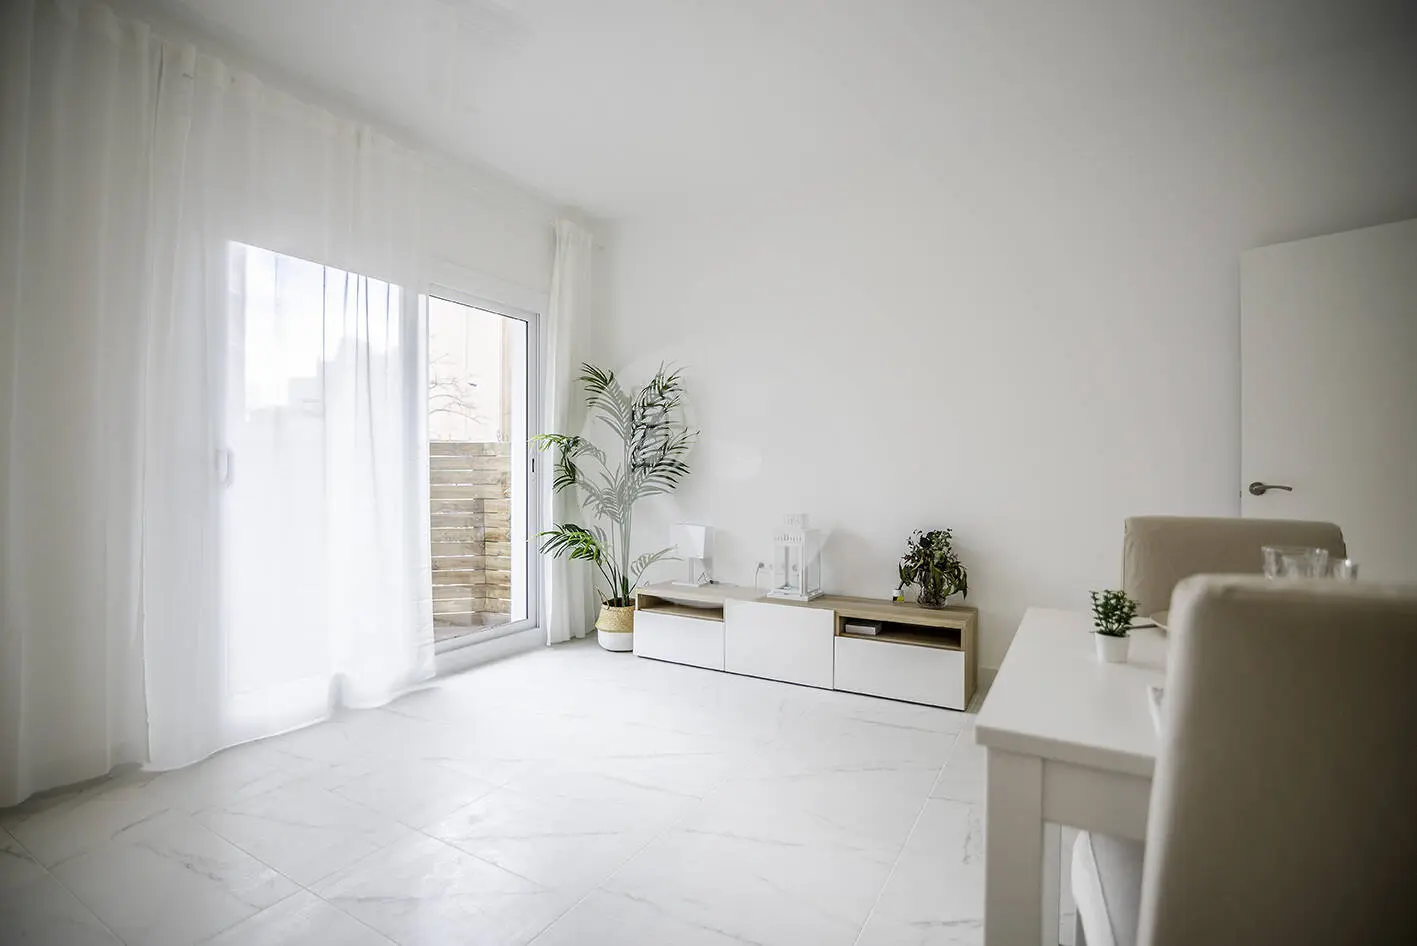 Brand new completely renovated apartment on Aragó street in the heart of El Clot in Barcelona. 6